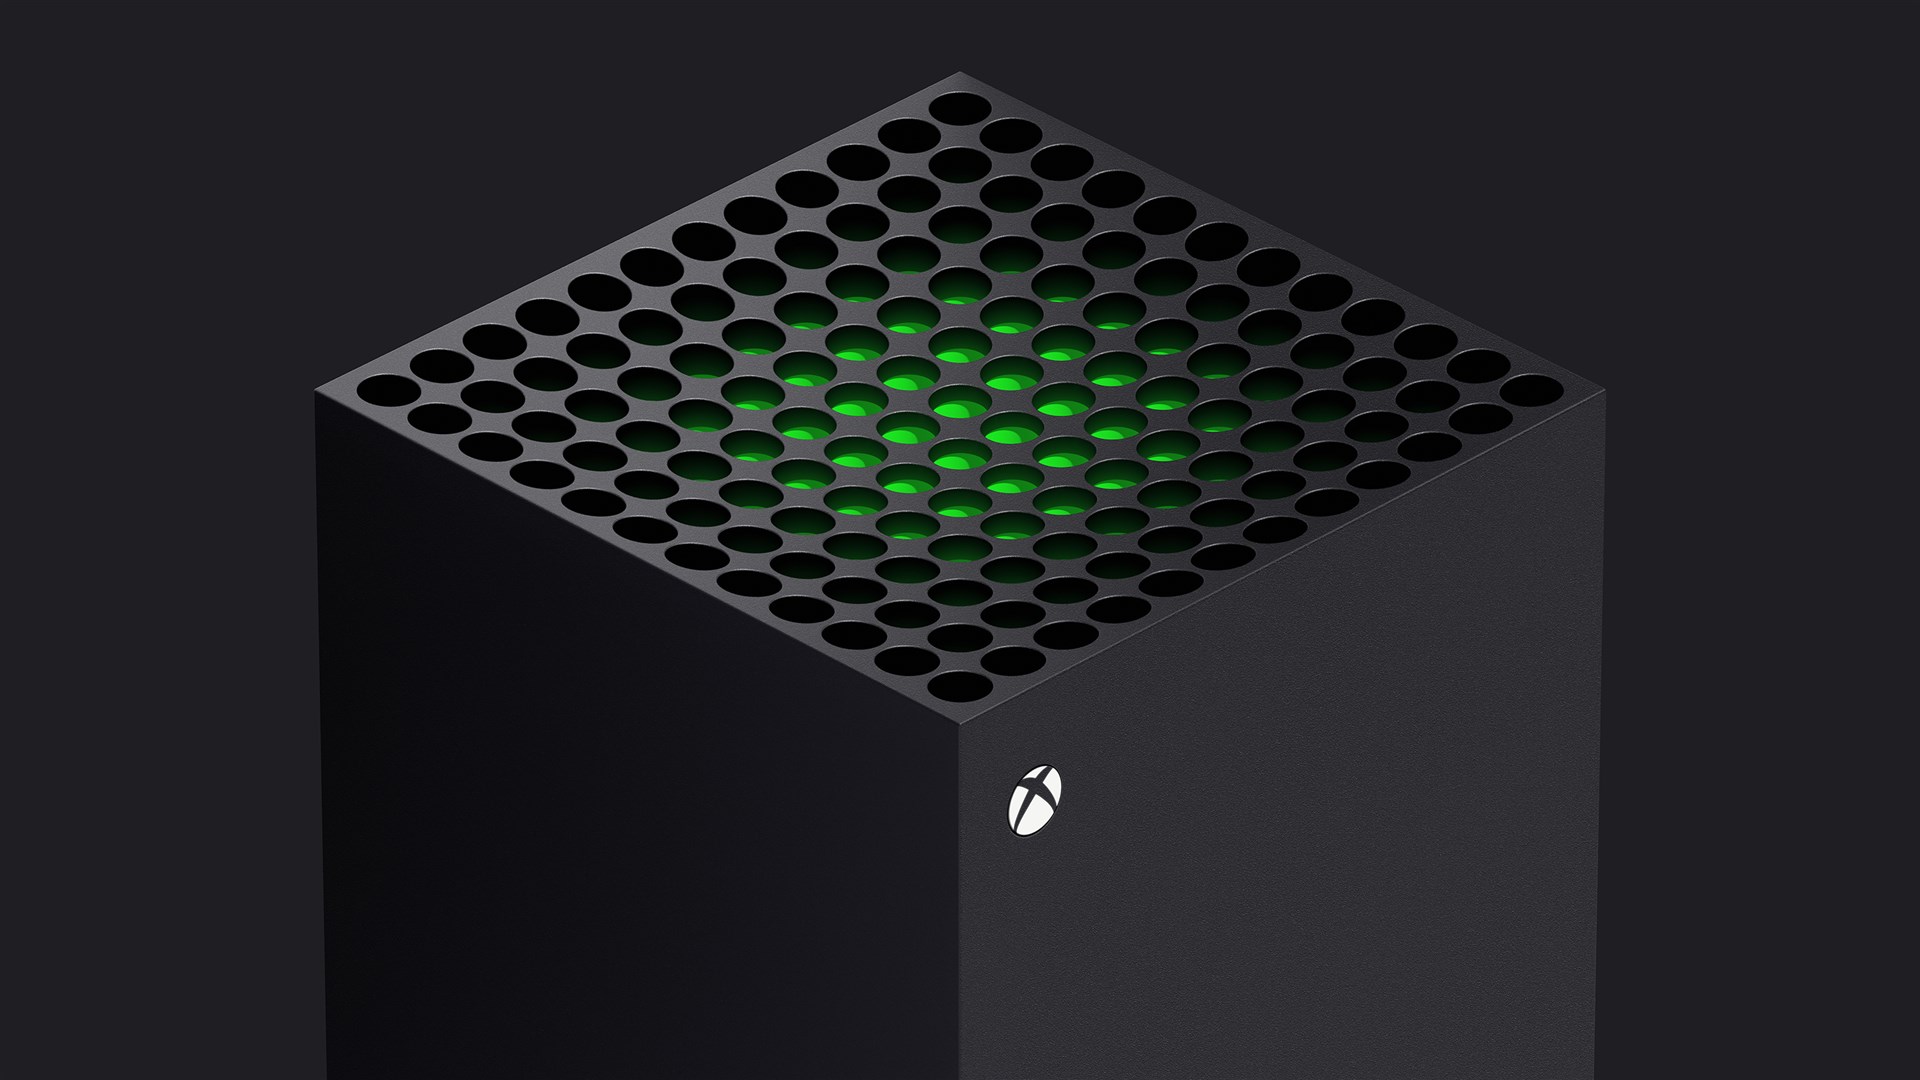 Xbox says the Series X is the most powerful console it has ever made (Xbox/PA)